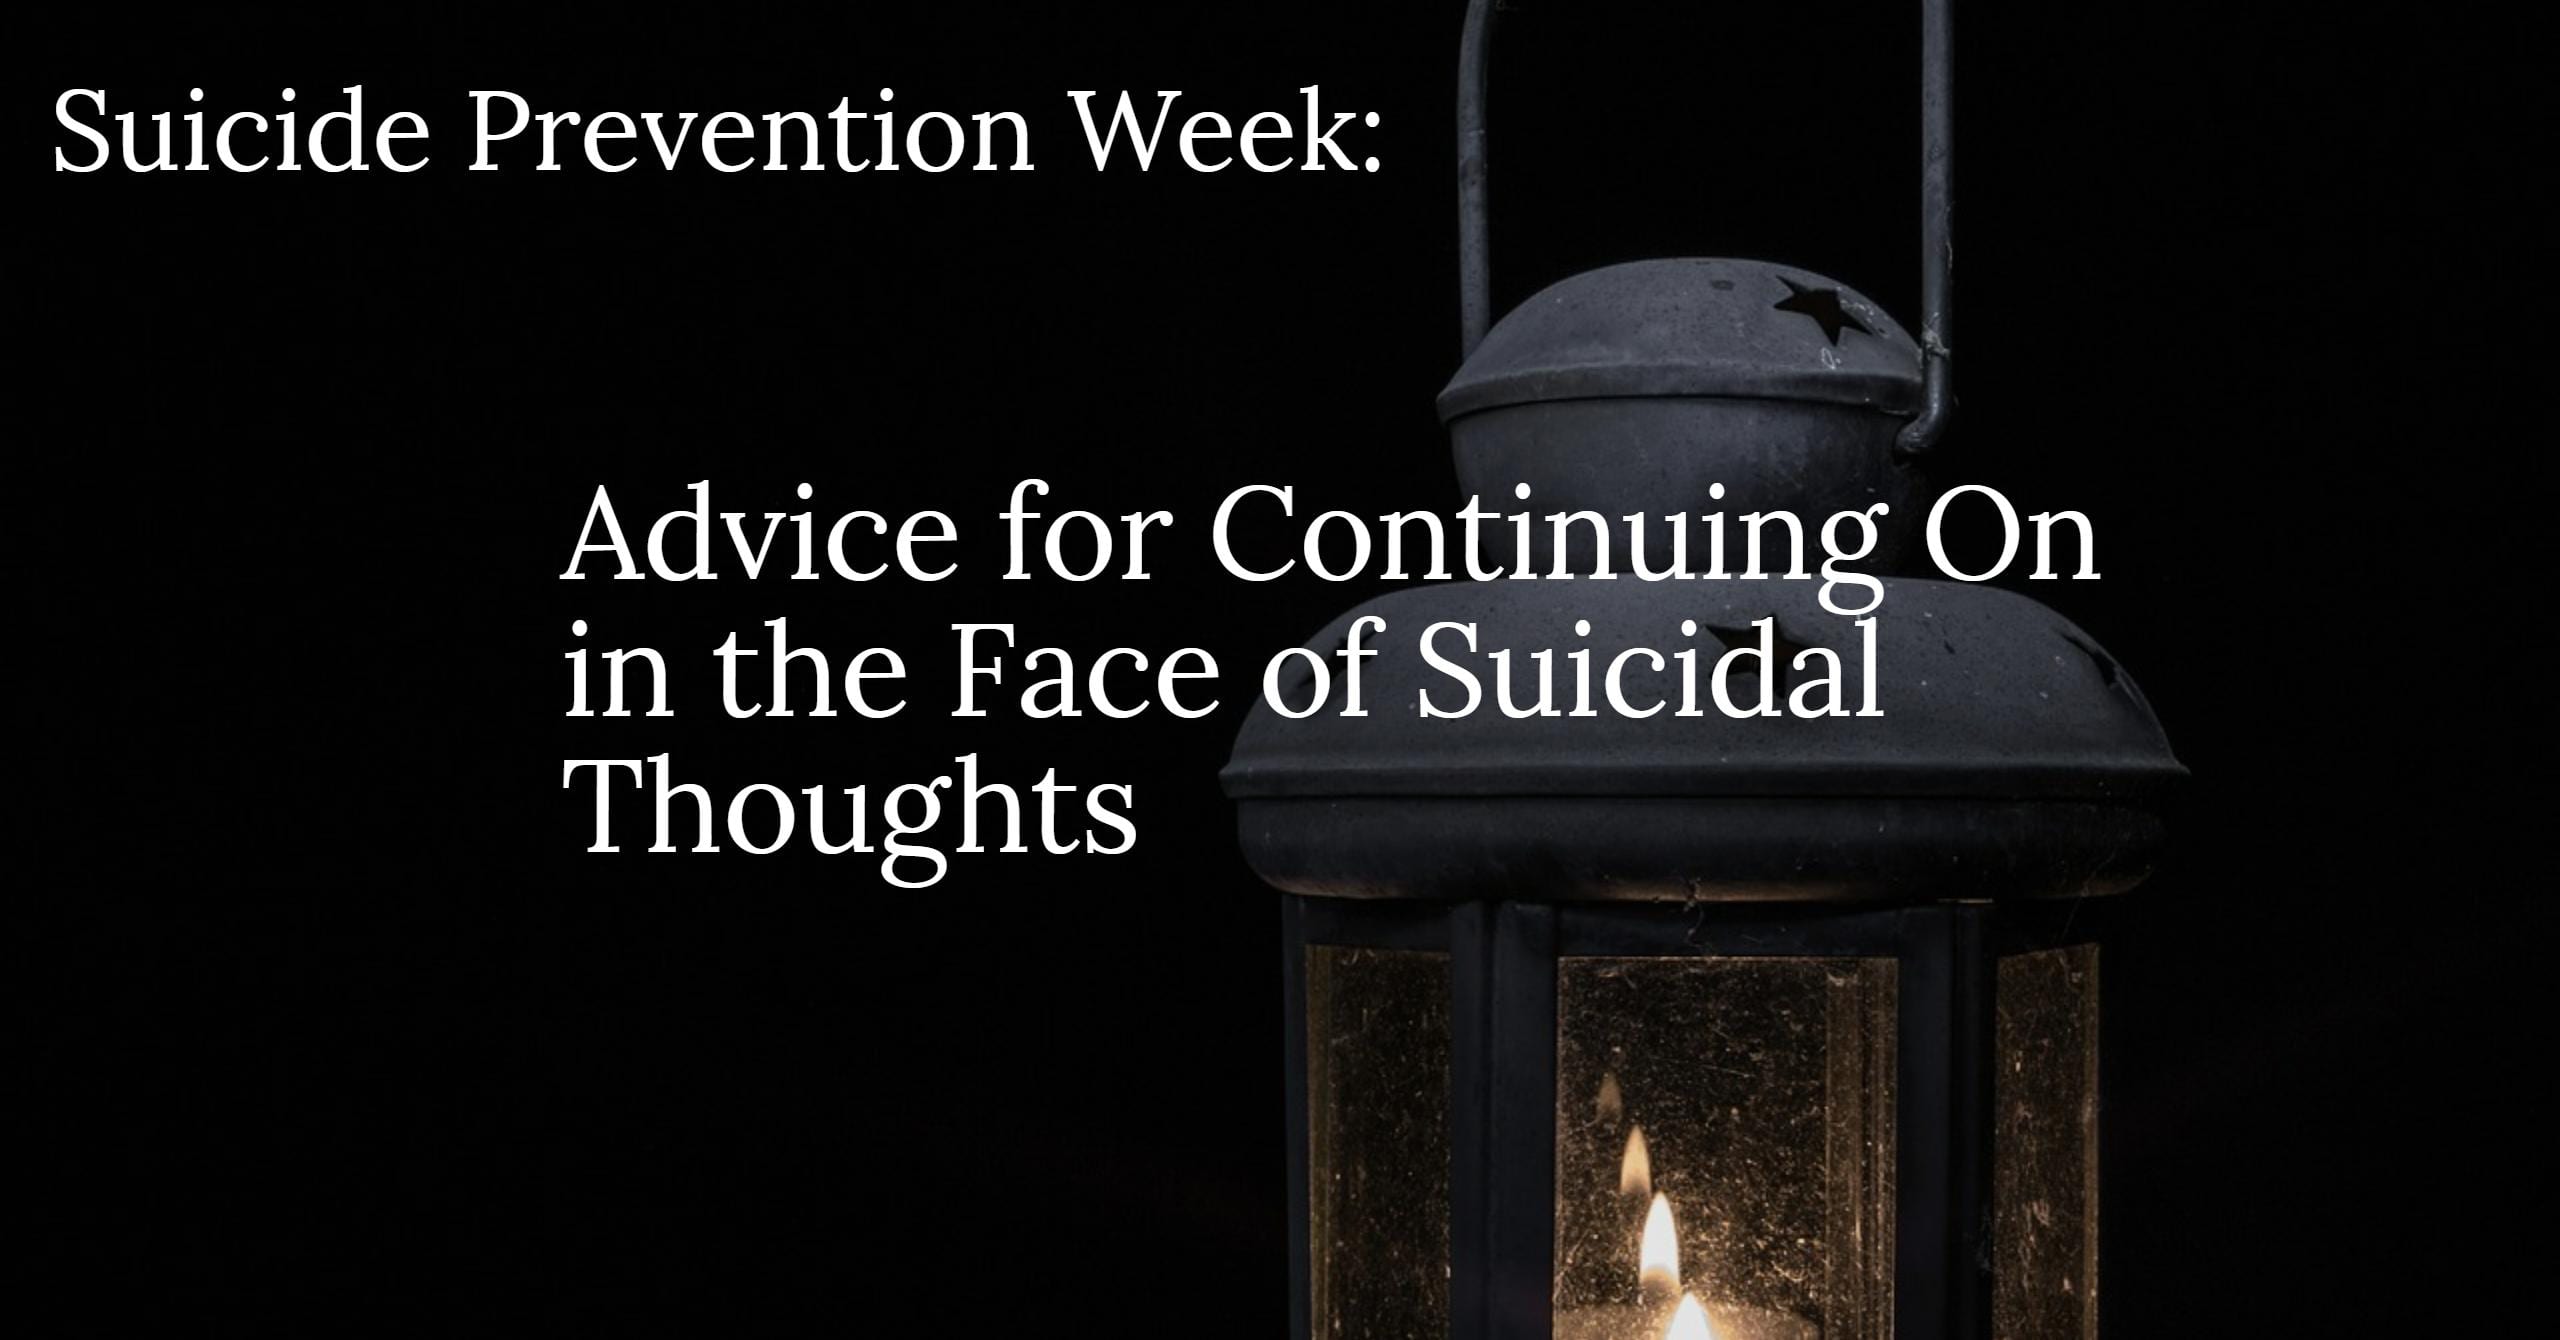 Advice for Continuing on in the Face of Suicidal Thoughts